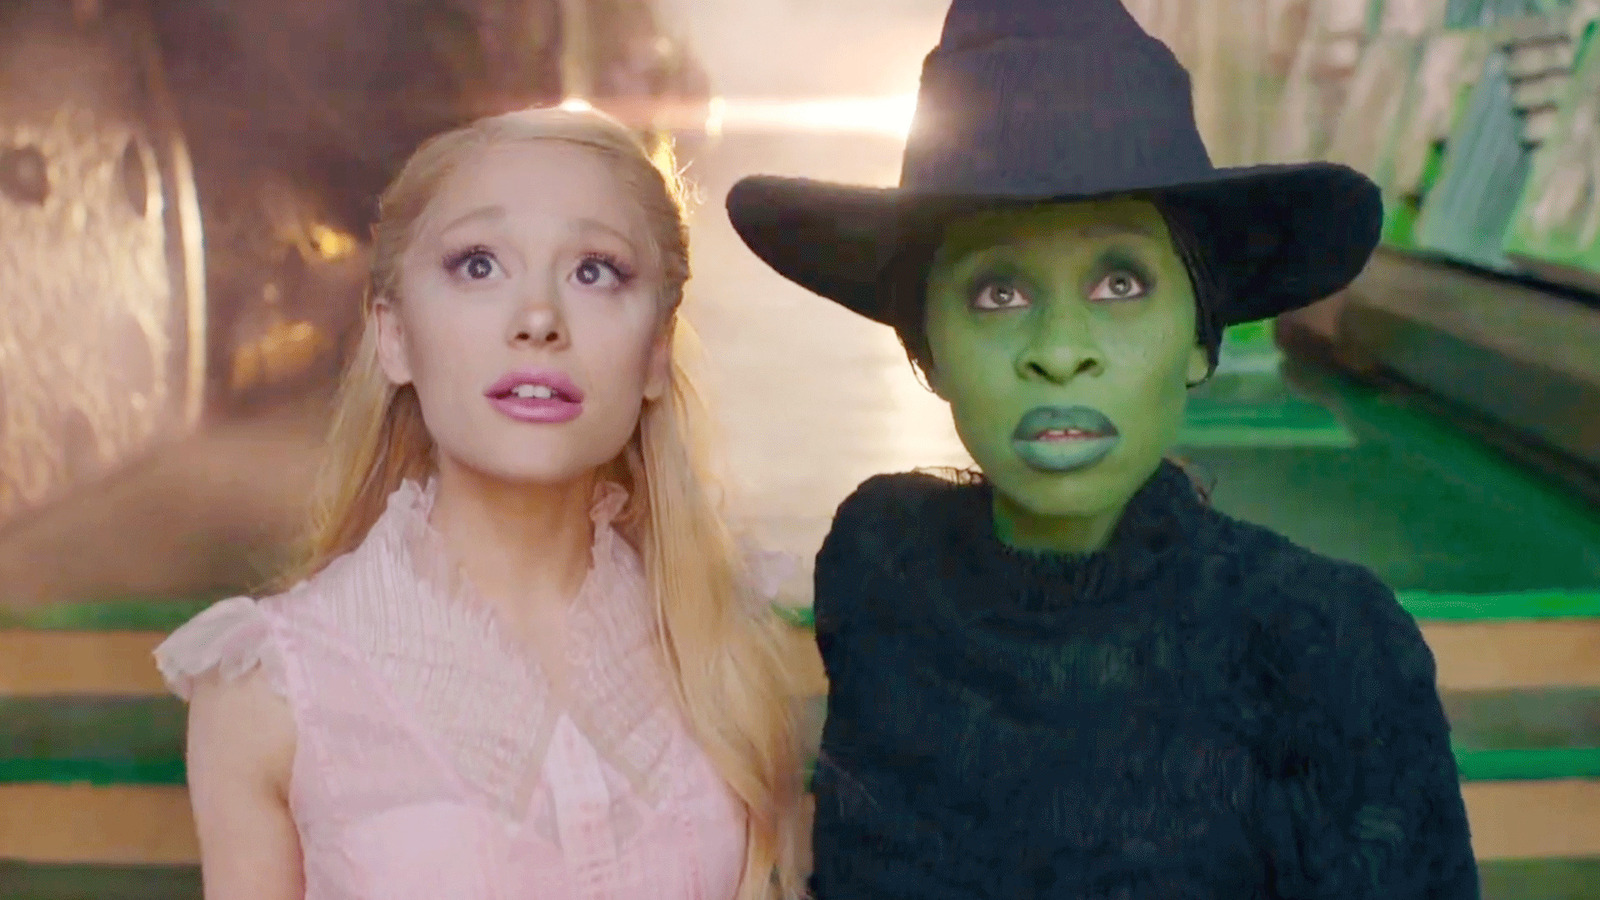 The Wicked Trailer Doesn’t Want You To Know It’s A Musical (And That It’s Two Movies)